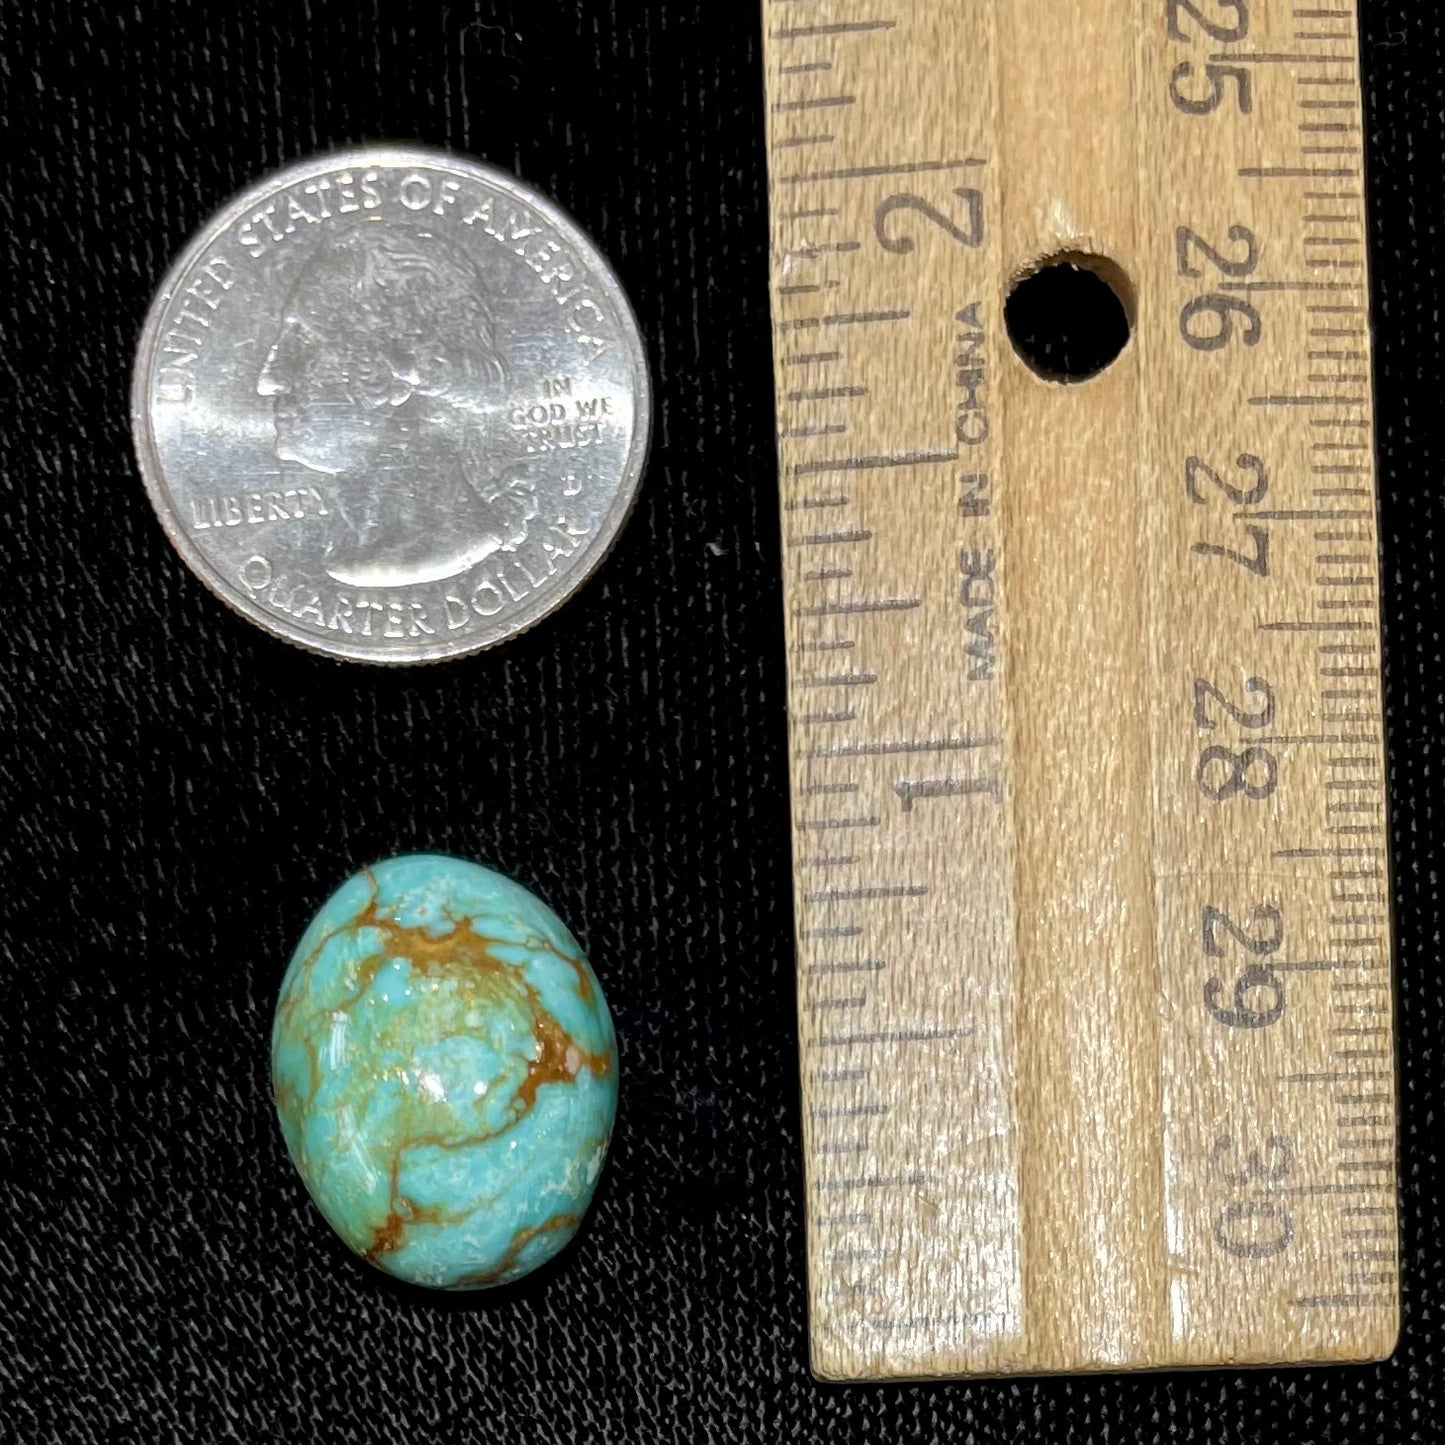 A loose, greenish blue turquoise stone with brown matrix from the Royston Mining District in Nevada.